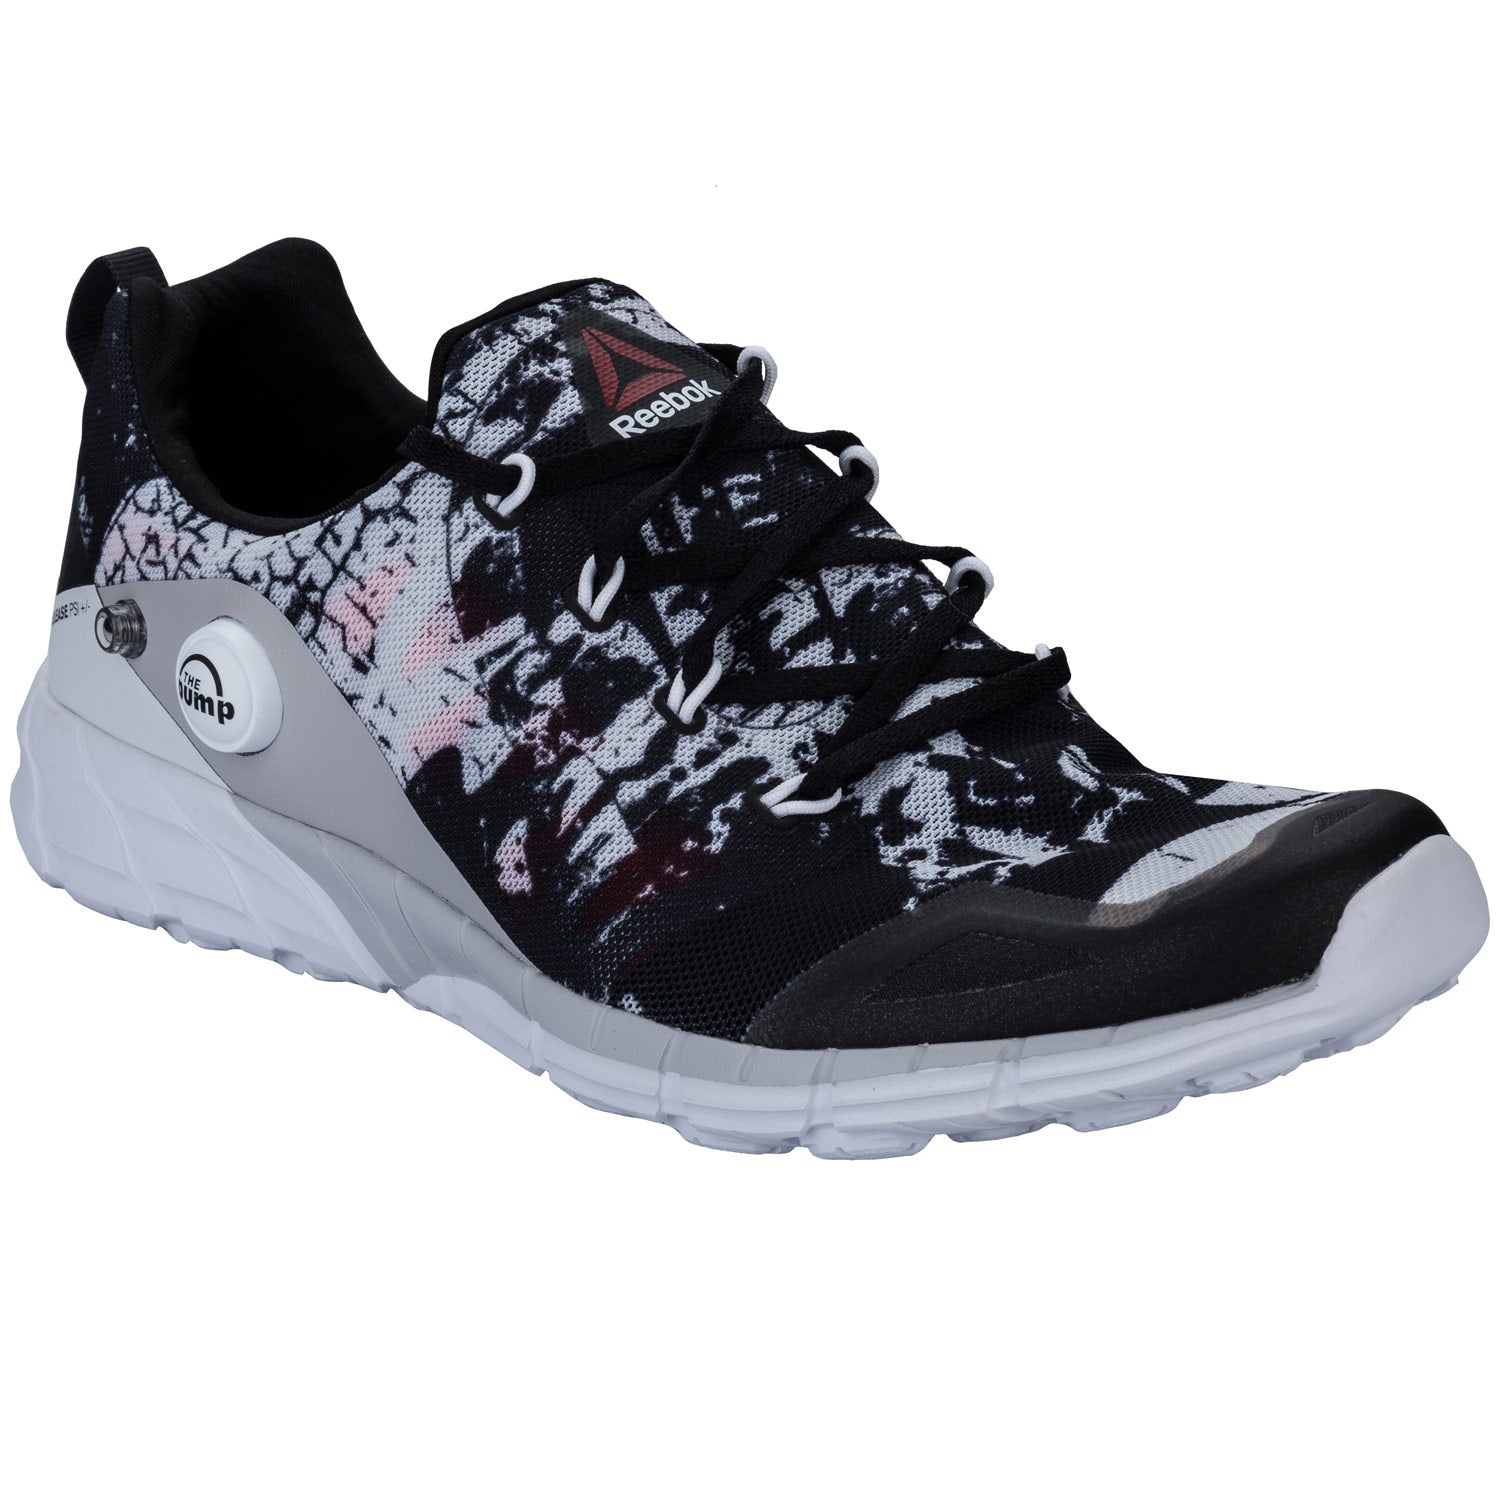 Men's Reebok Fusion 2.0 Dunes Running shoes Trainers V72623 – Smfashiontrends